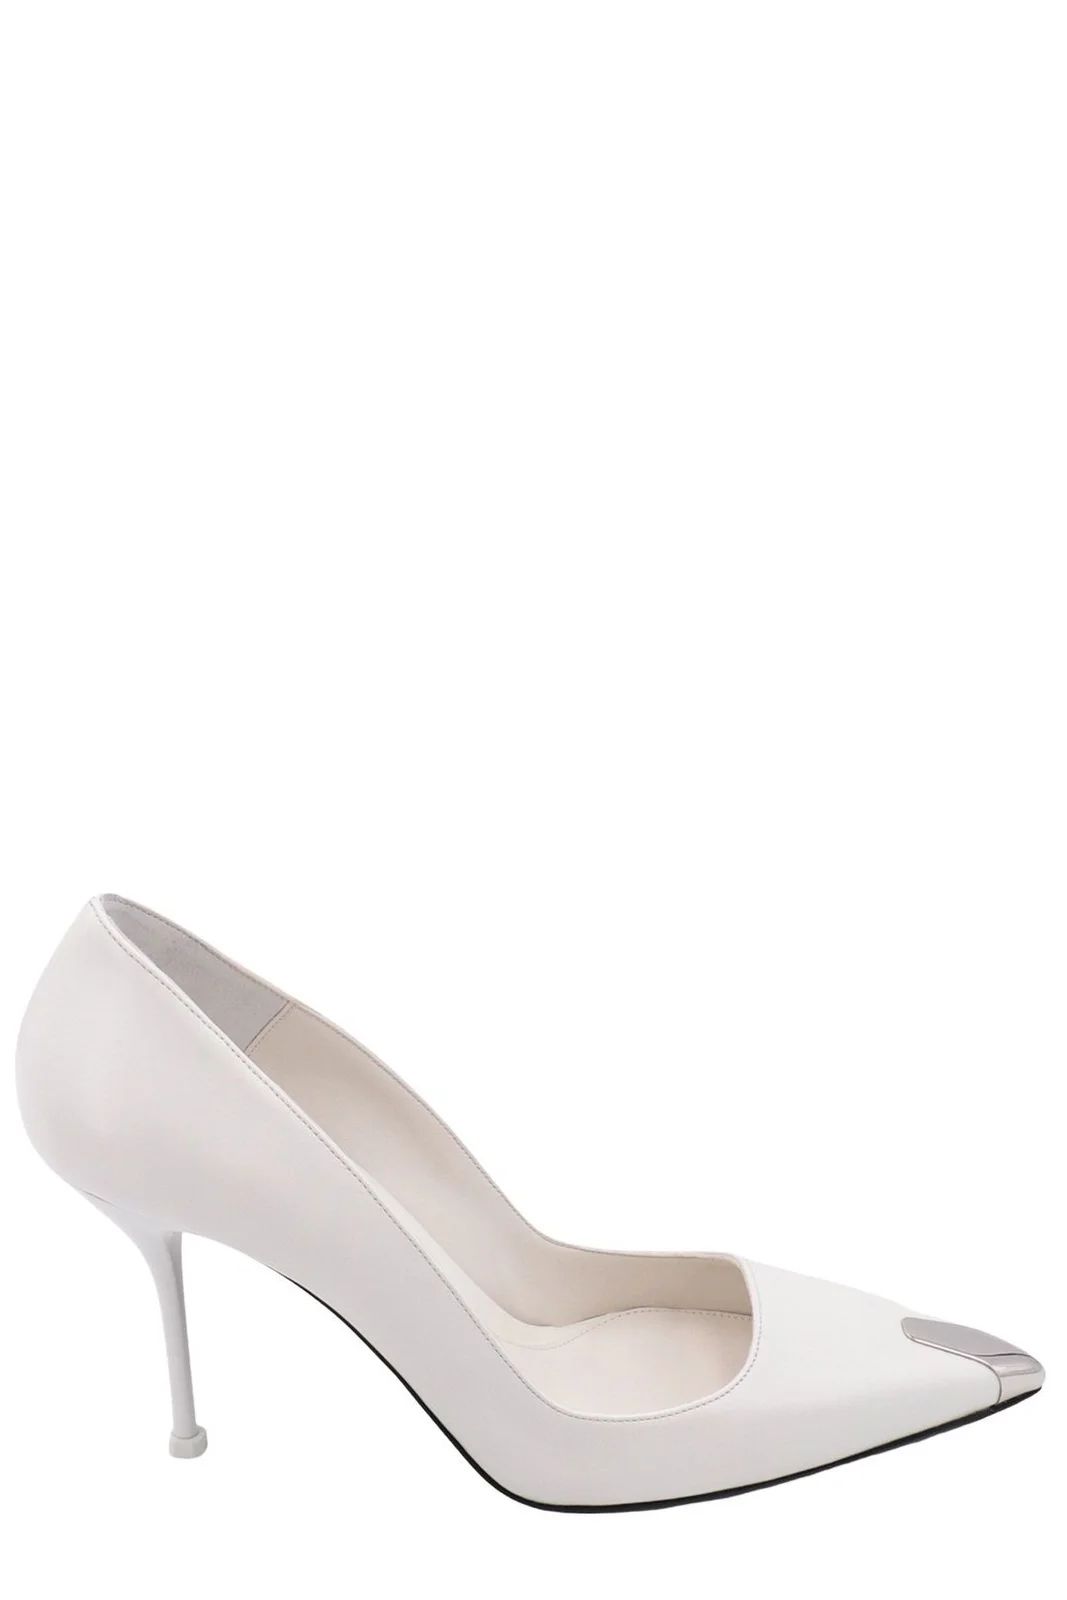 Alexander McQueen Pointed Toe Pumps | Cettire Global